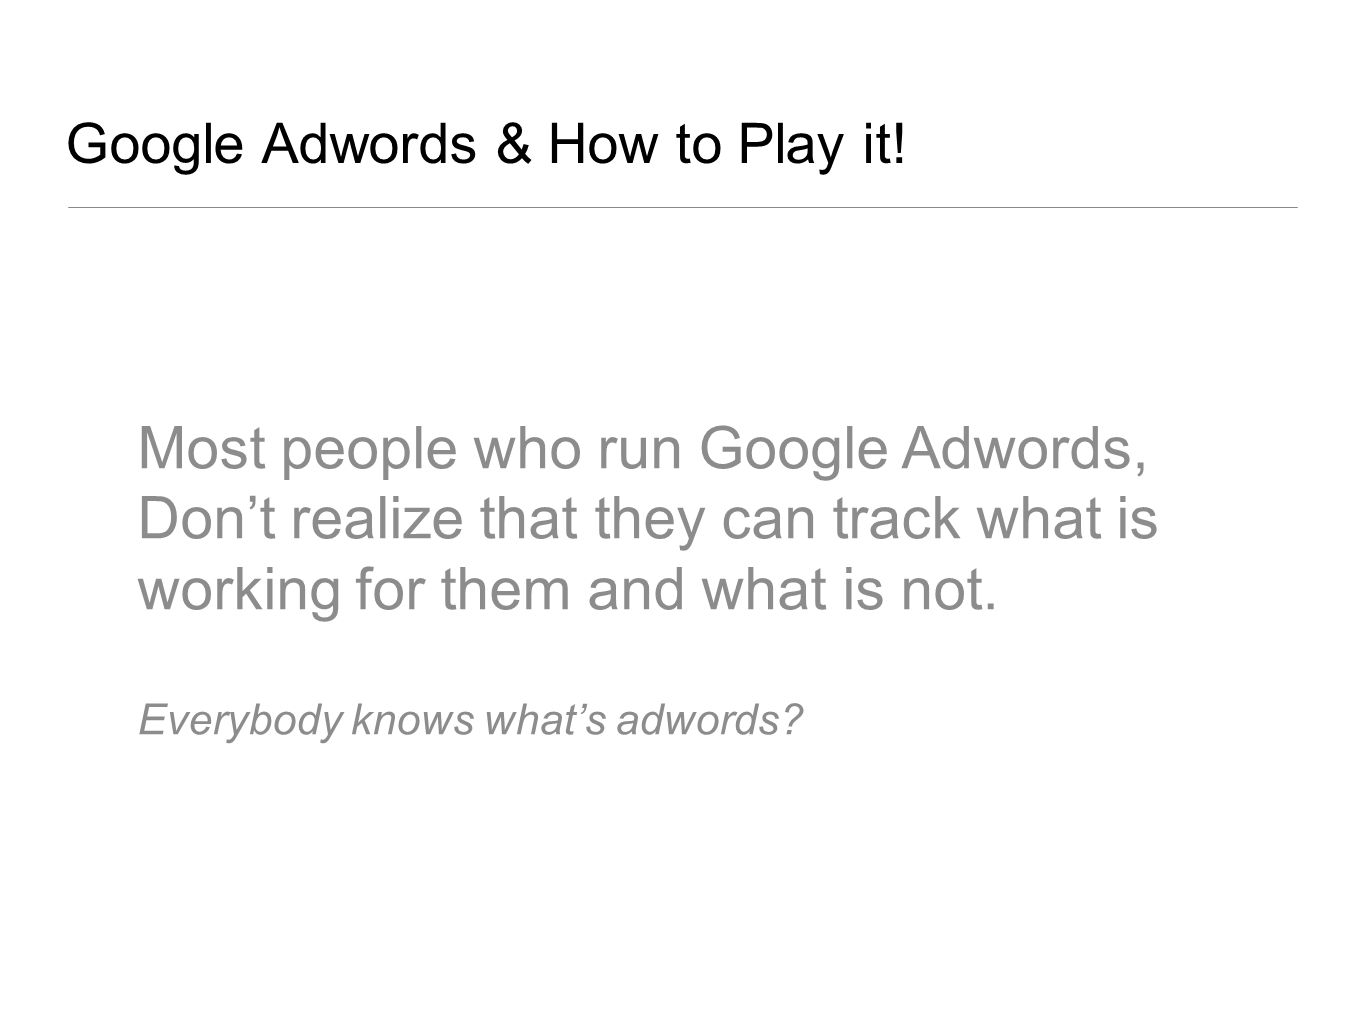 Google Adwords & How to Play it.